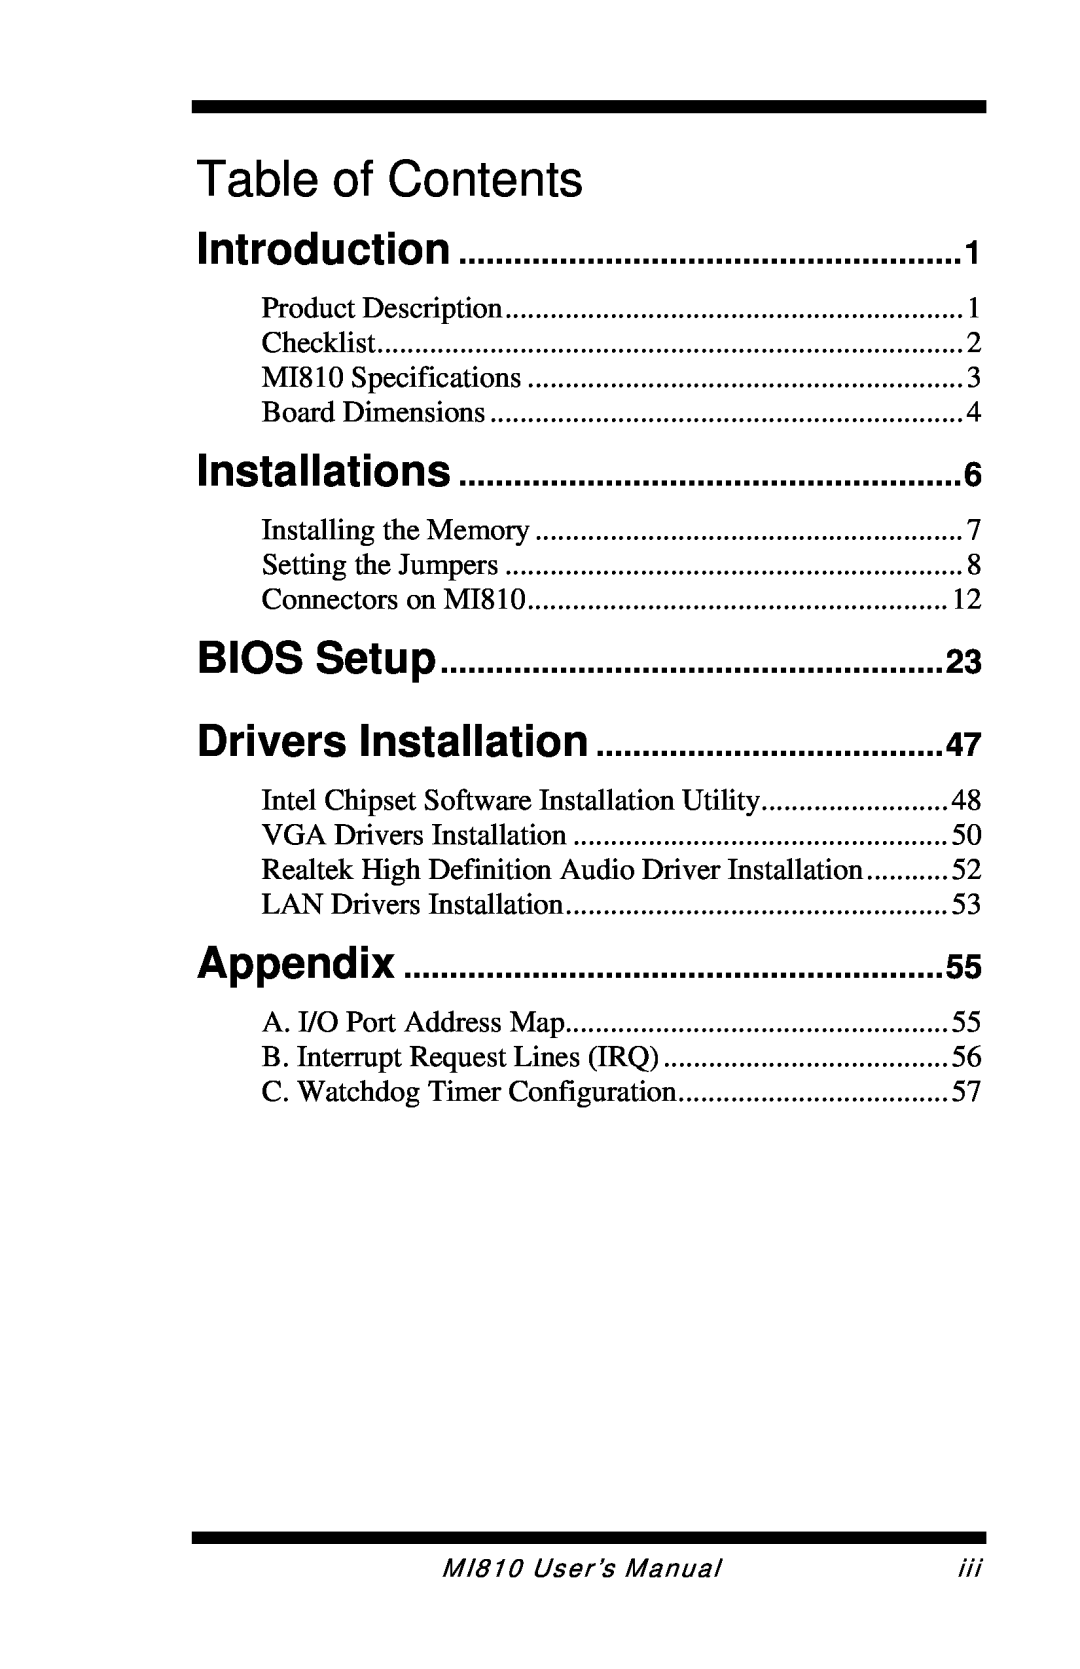 Intel MI810 user manual Introduction, Installations, BIOS Setup, Drivers Installation, Appendix, Table of Contents 